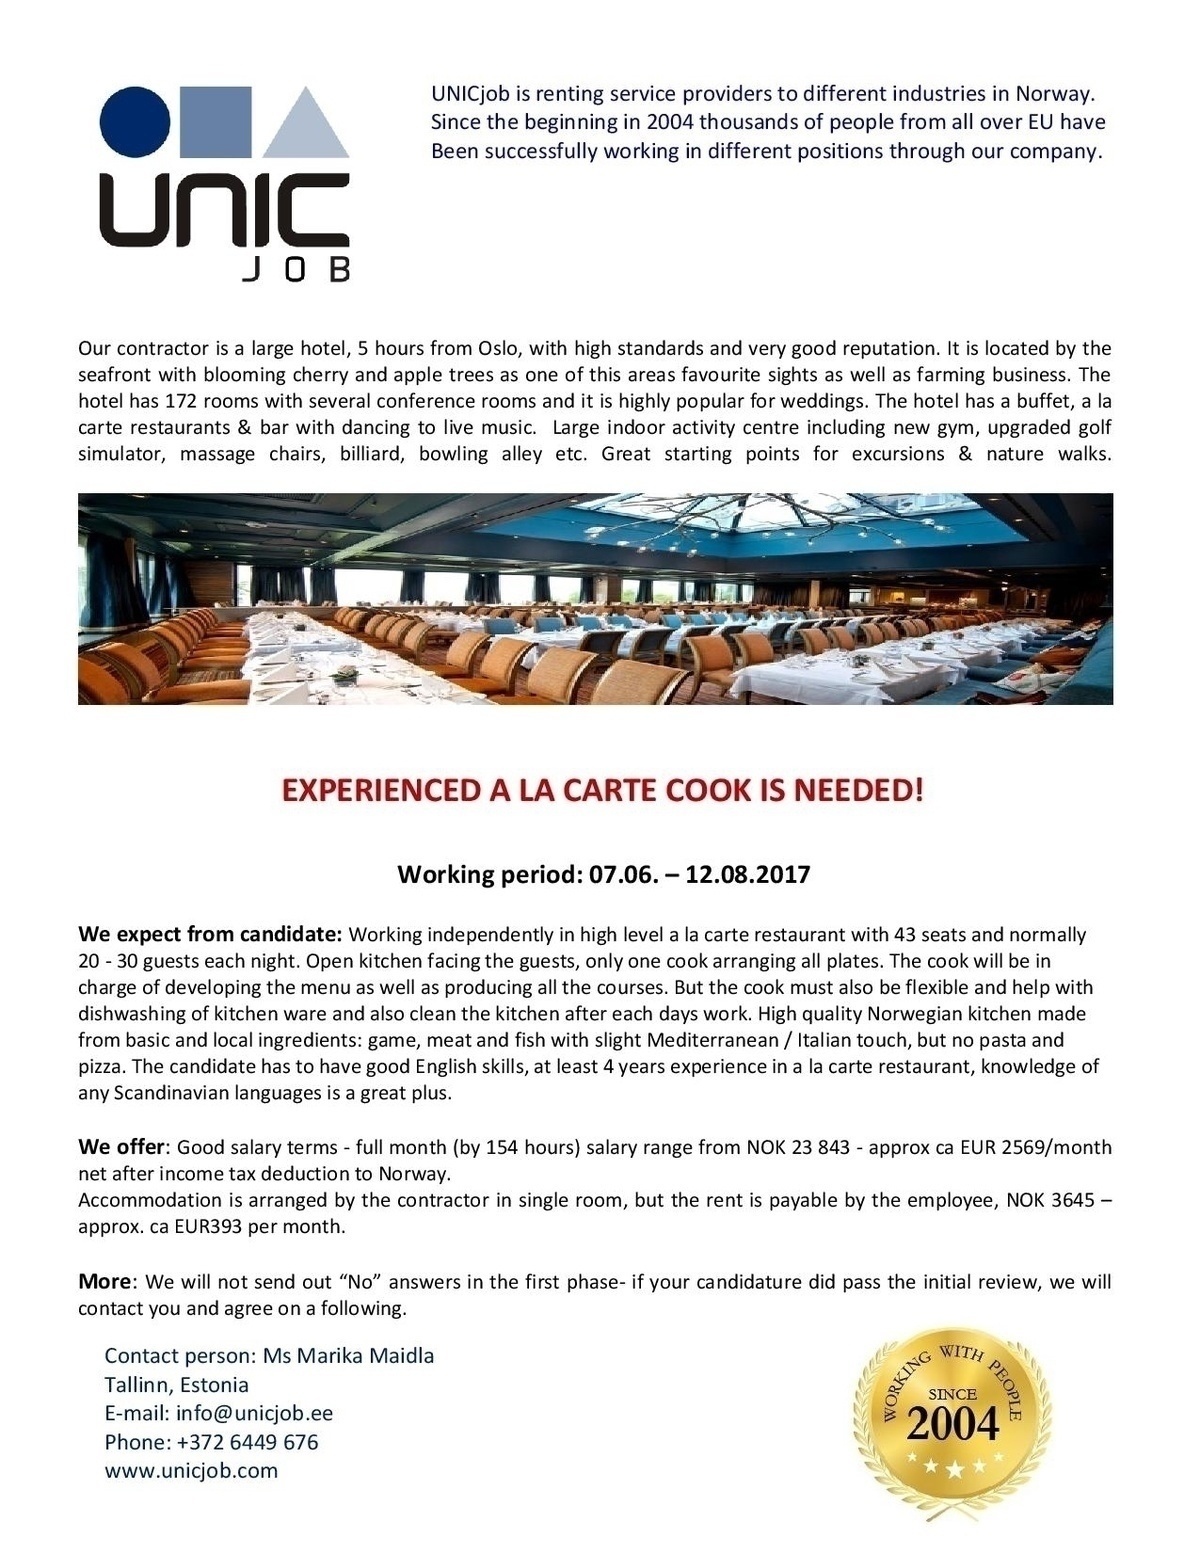 Unic Management OÜ Experienced a la carte cook to work in Norway 07.06 - 12.08.17